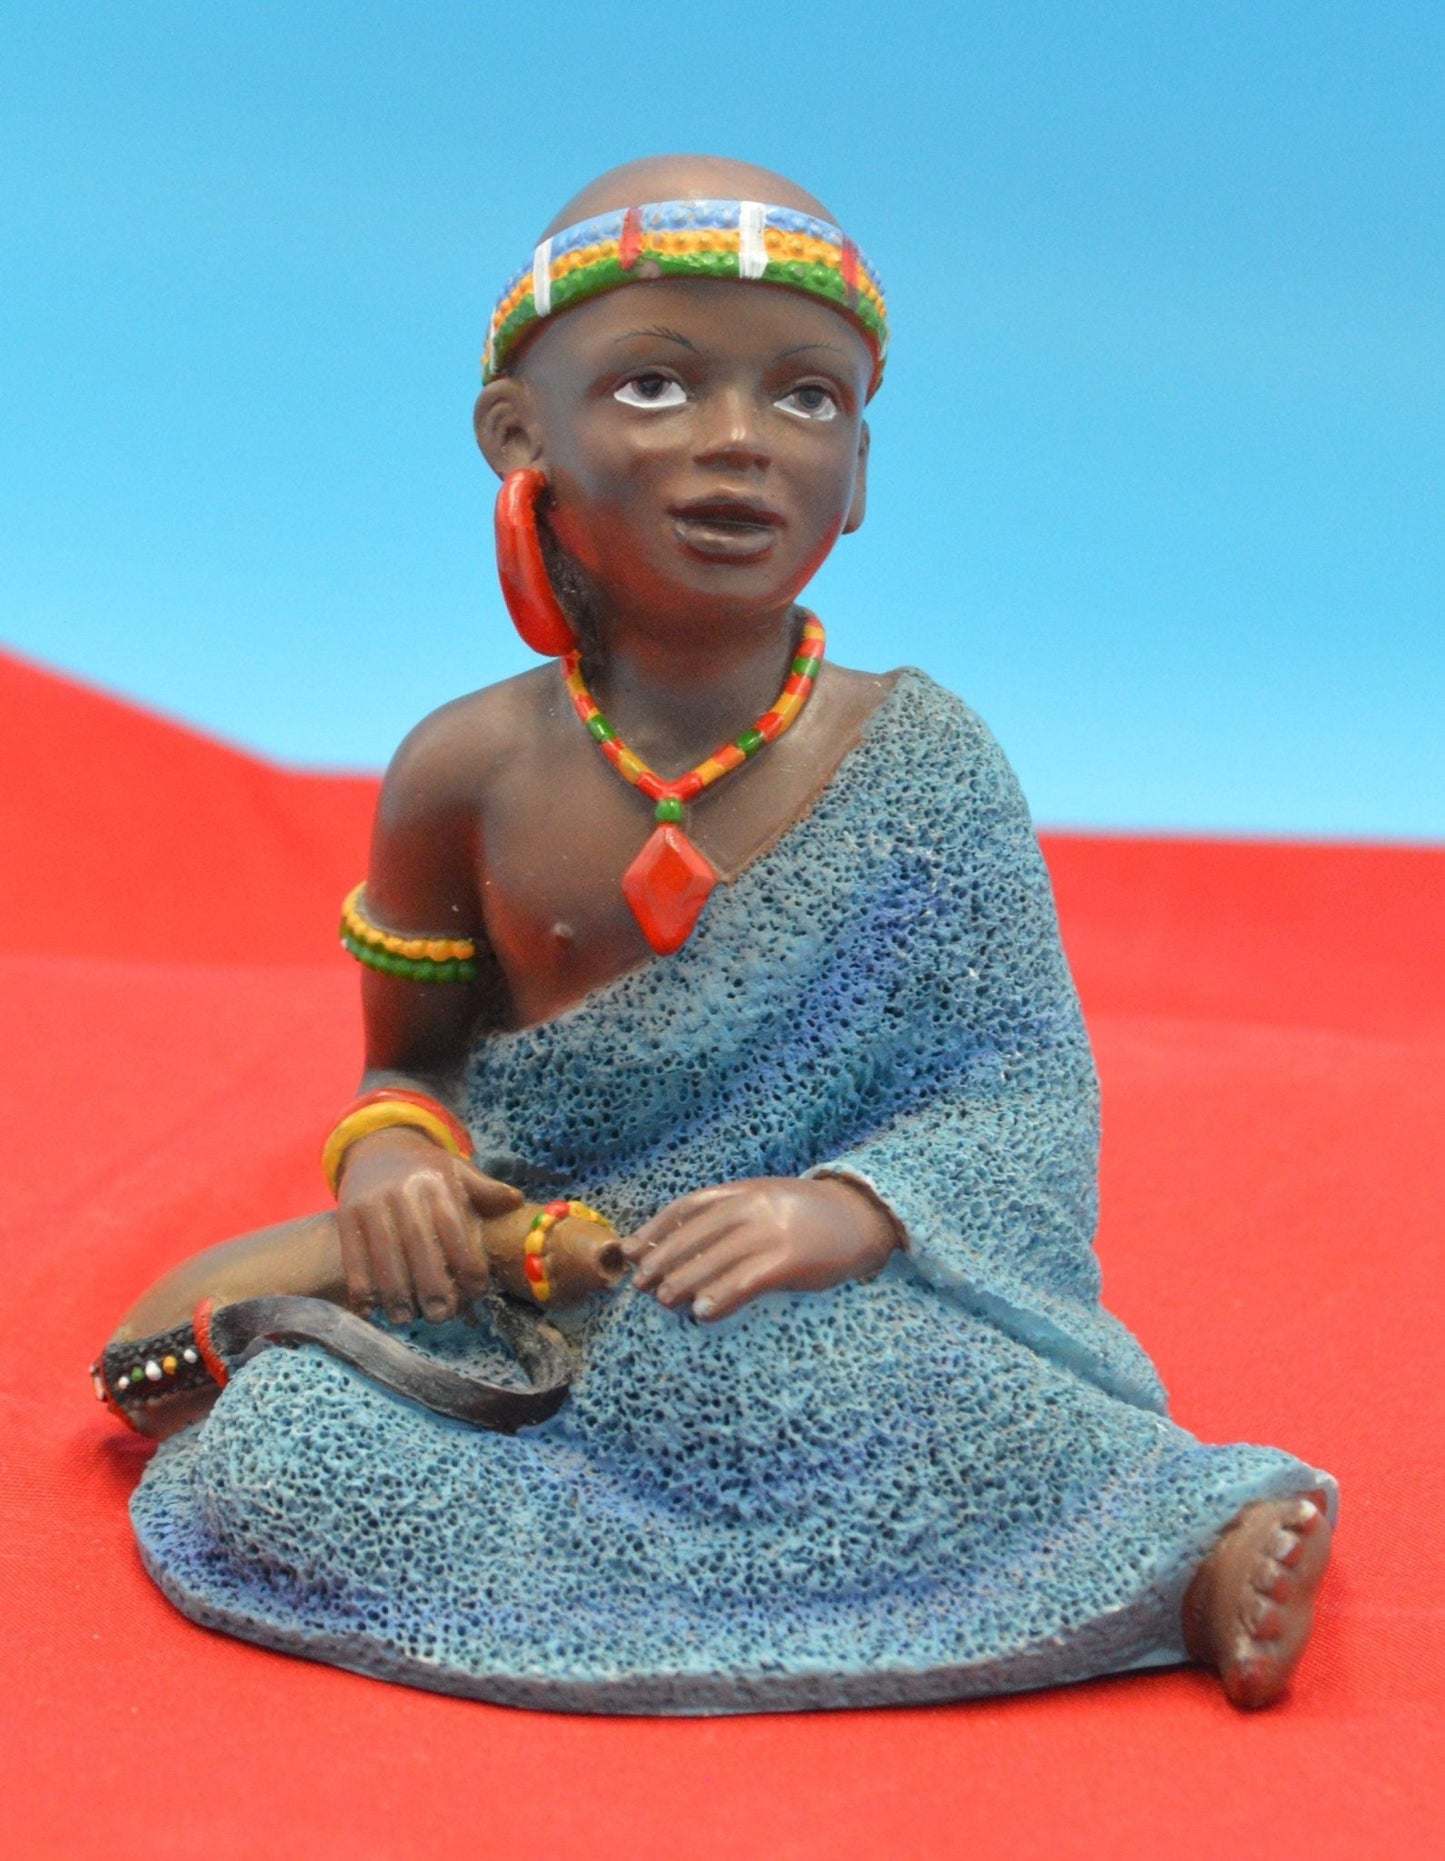 DECORATIVE Tribal Figurine Appears To Be Hand Painted.” - TMD167207